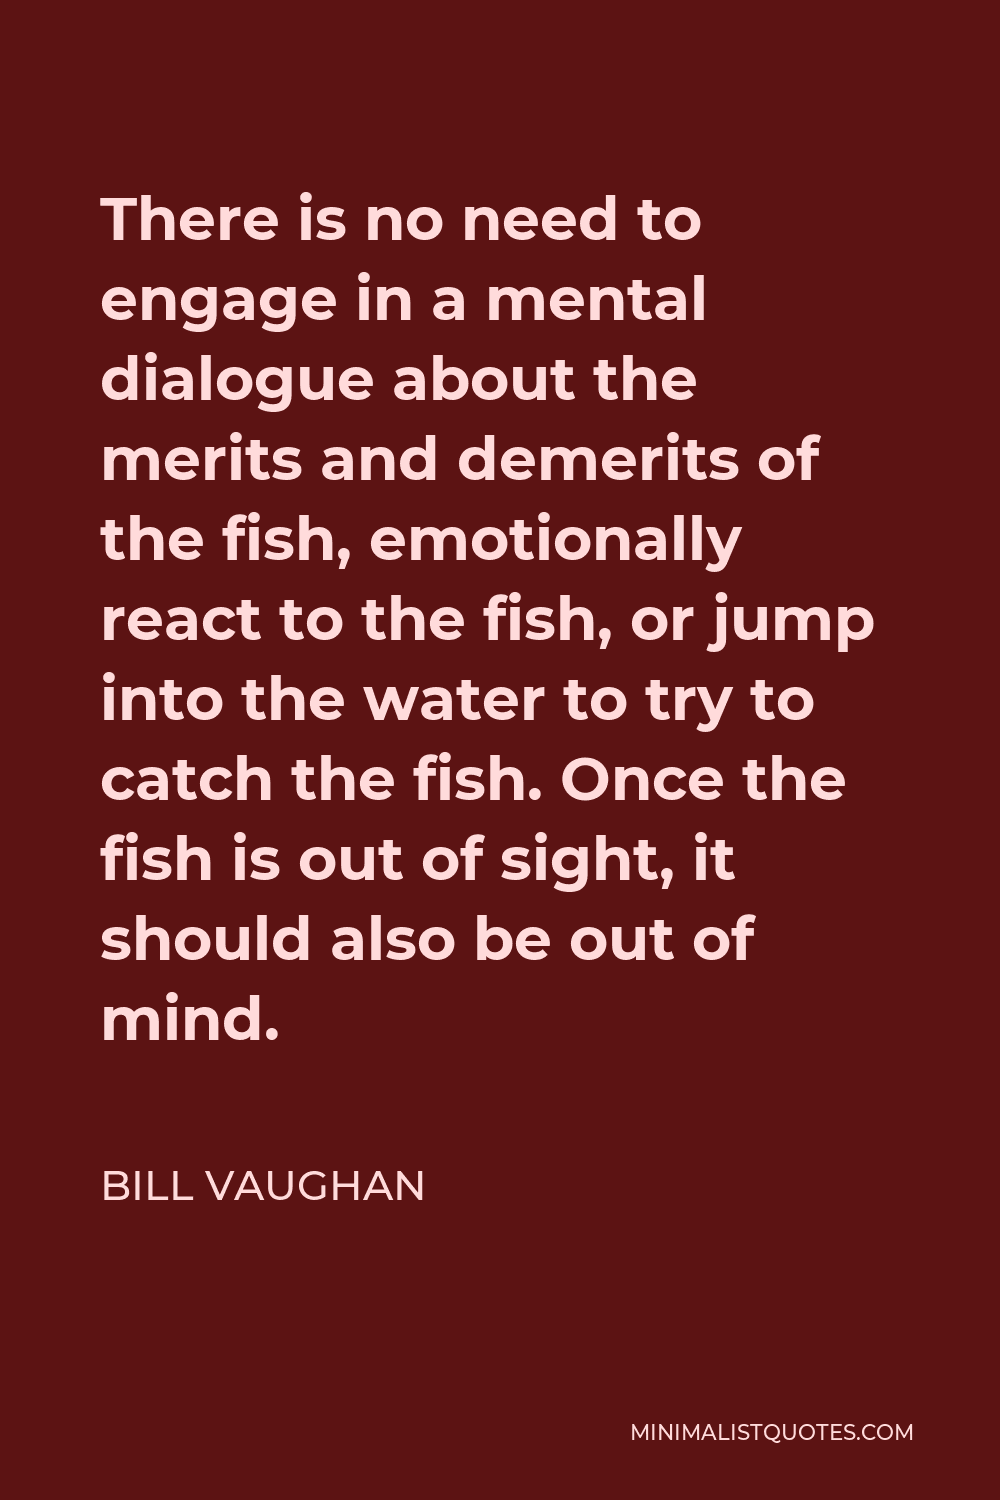 Bill Vaughan Quote - There is no need to engage in a mental dialogue about the merits and demerits of the fish, emotionally react to the fish, or jump into the water to try to catch the fish. Once the fish is out of sight, it should also be out of mind.